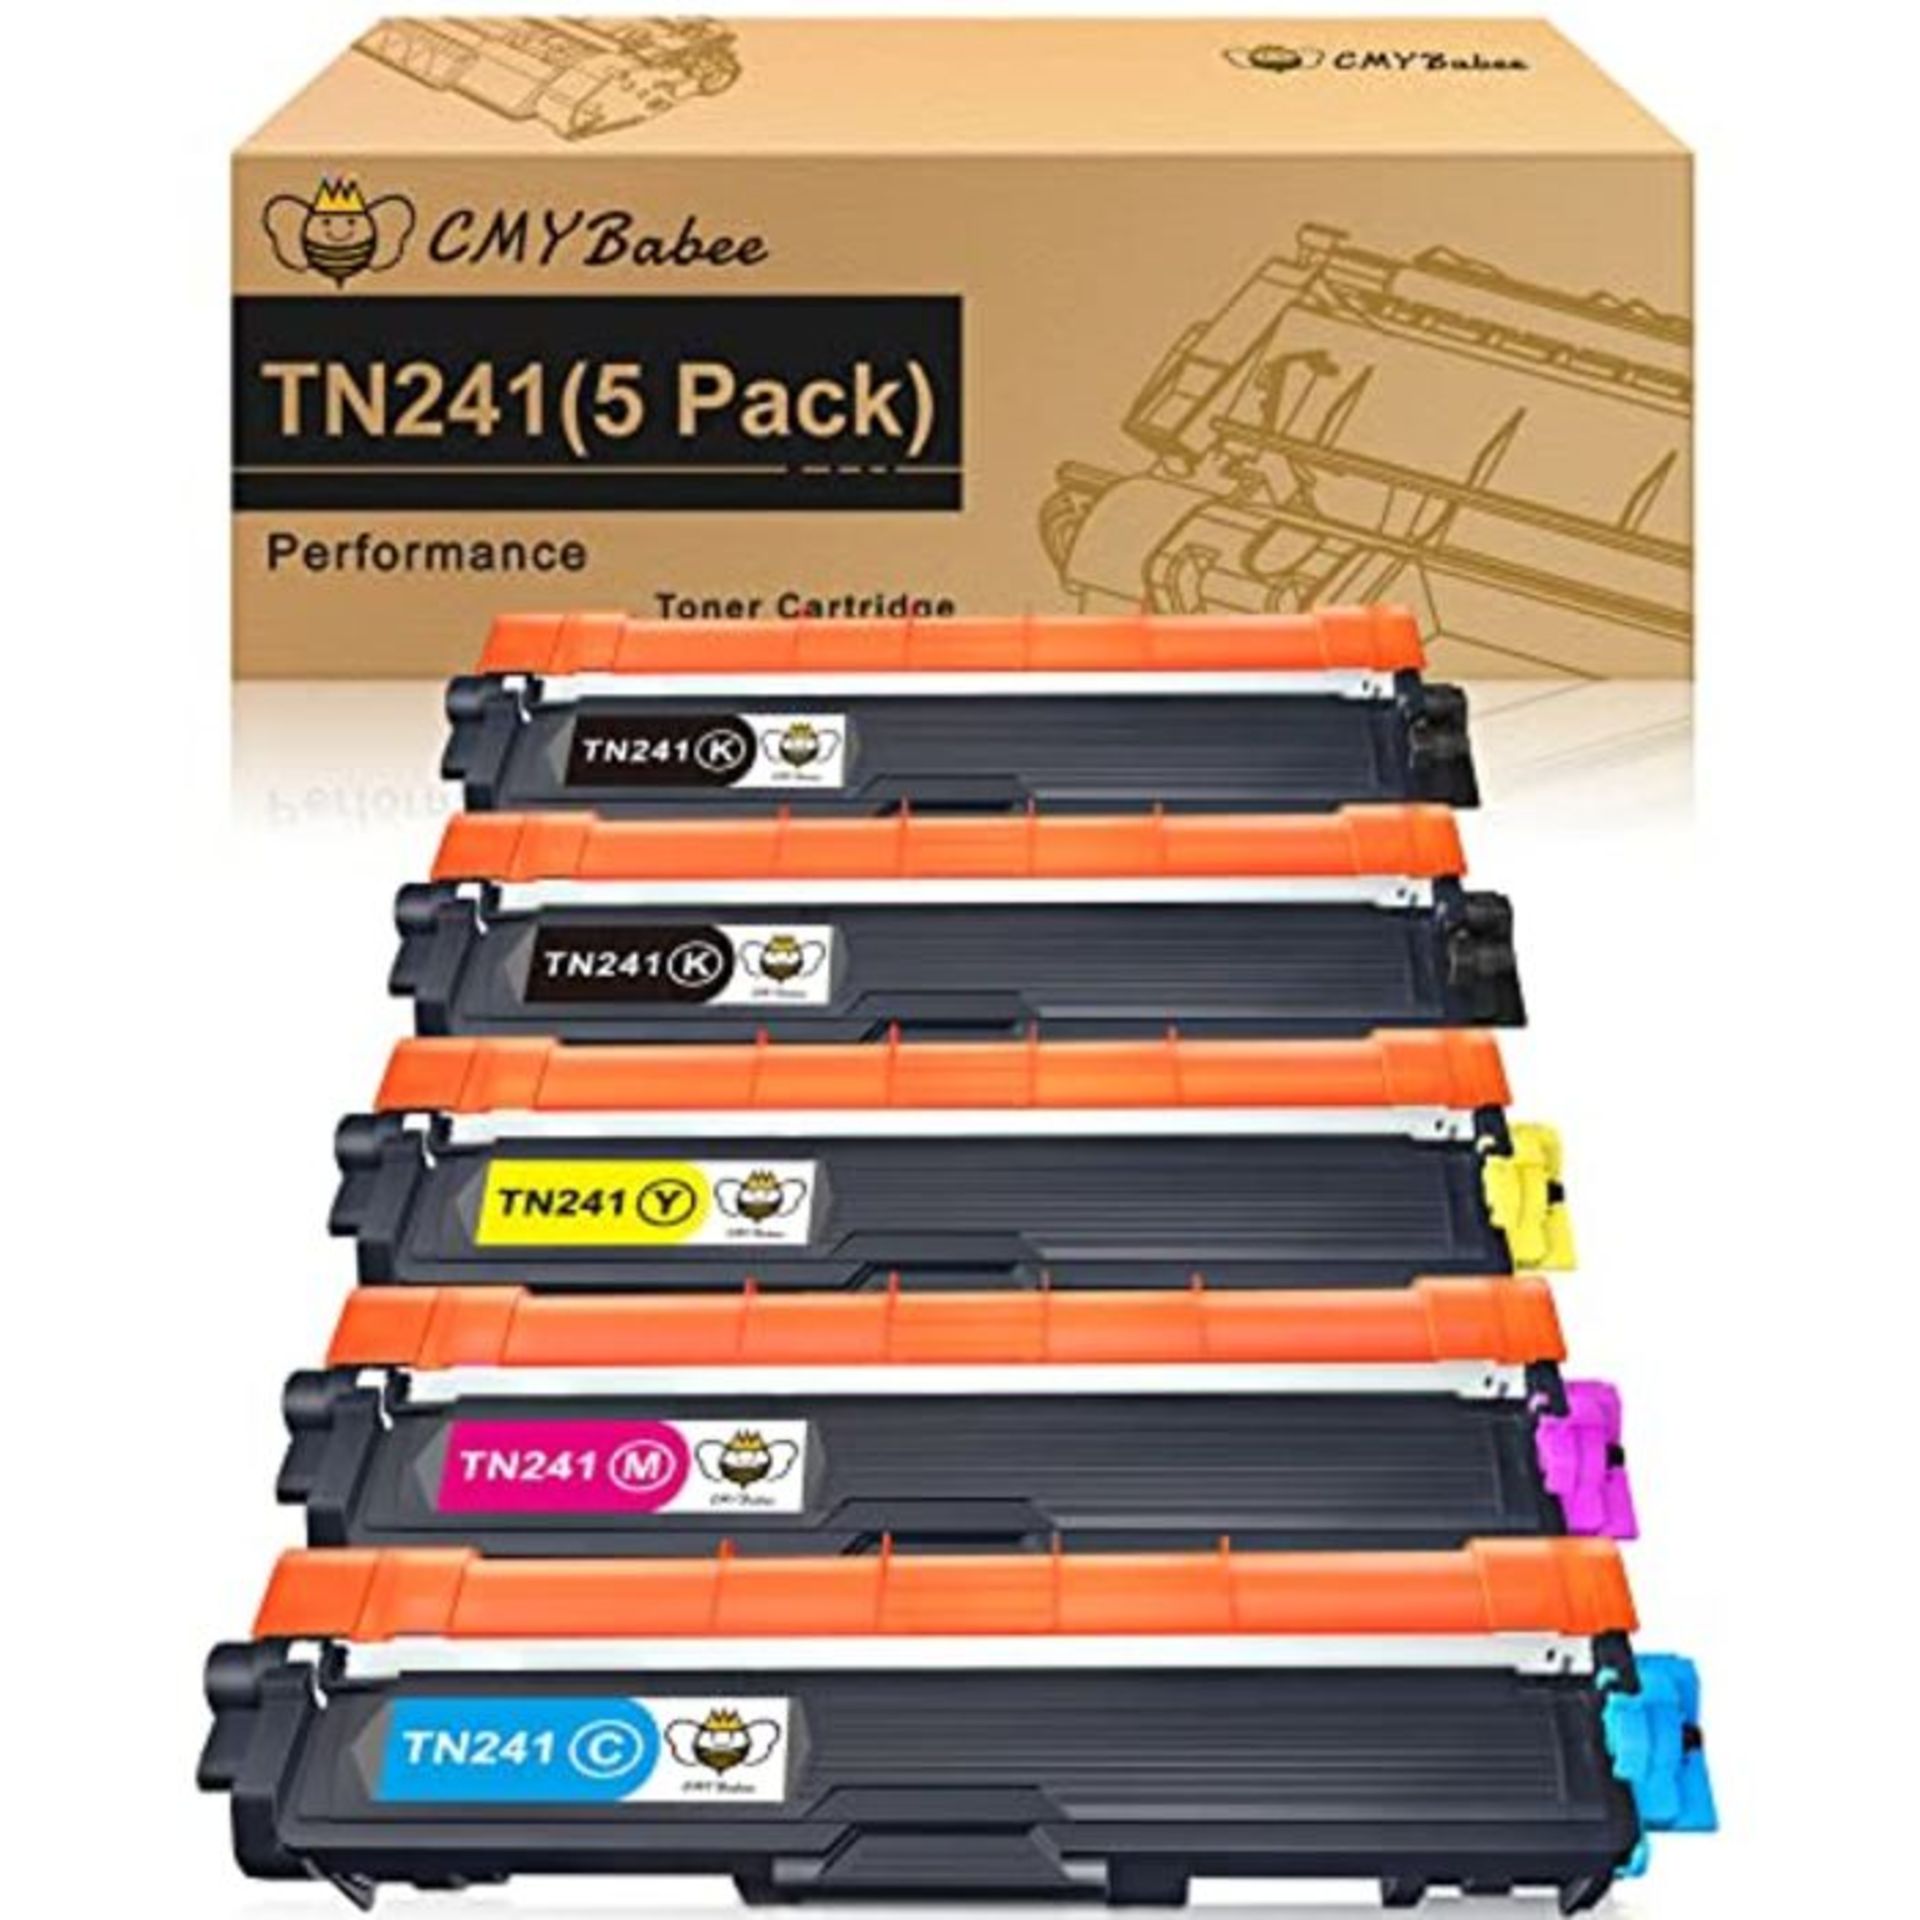 CMYBabee Compatible Toner Cartridge TN241 TN245 TN242 for Brother HL-3140CW HL-3150CDW